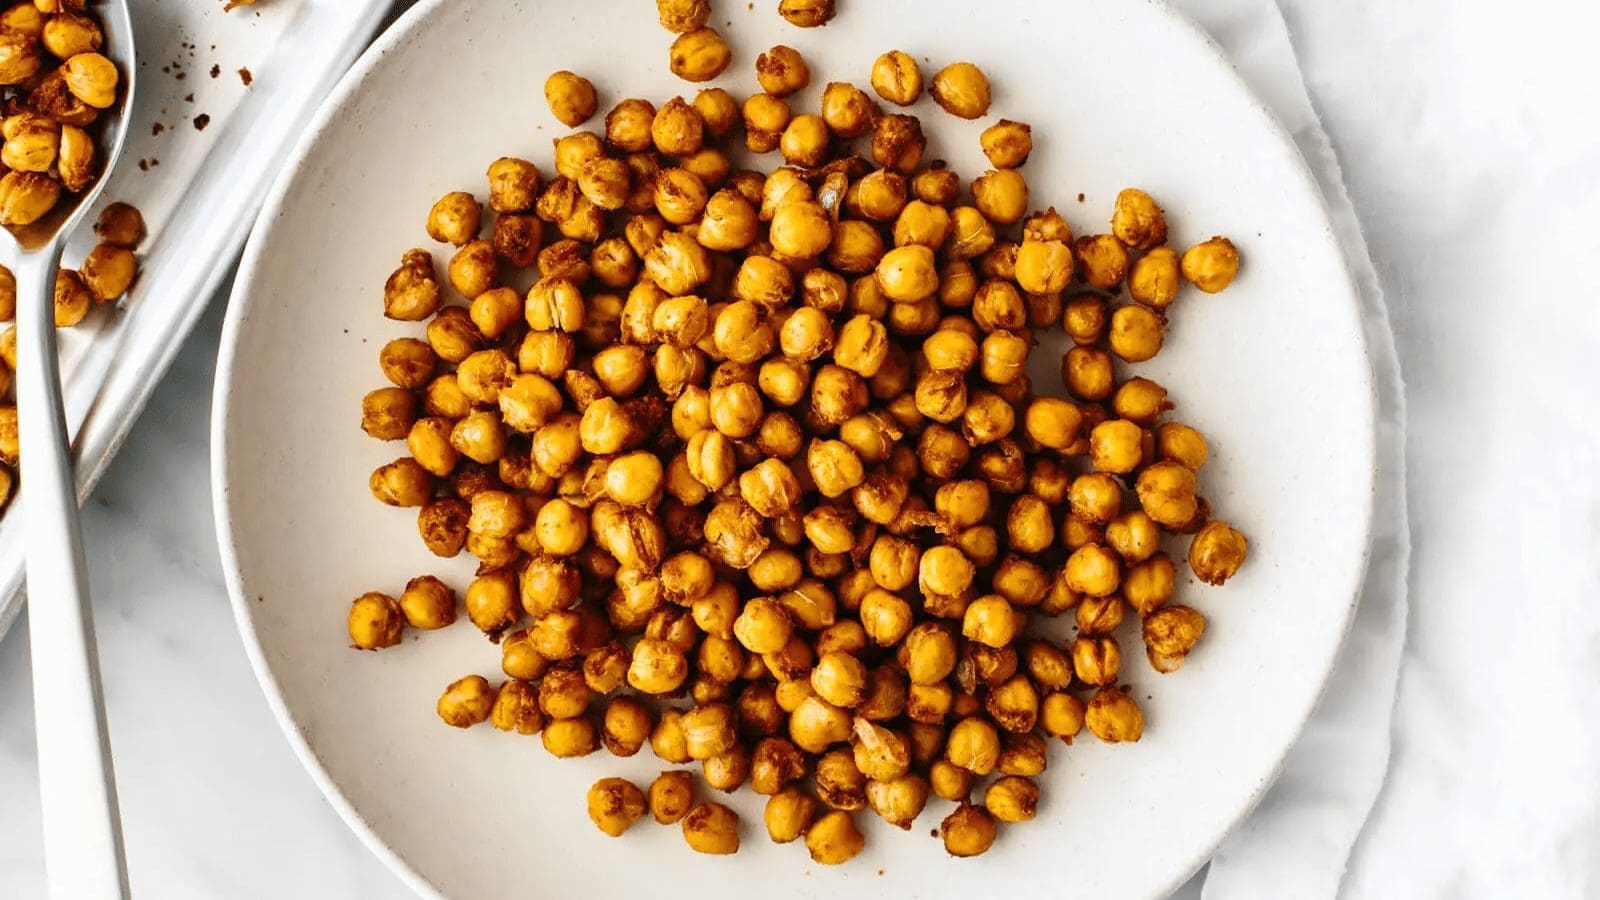 Global chickpea shortage may be easing shortly as cultivation increases 